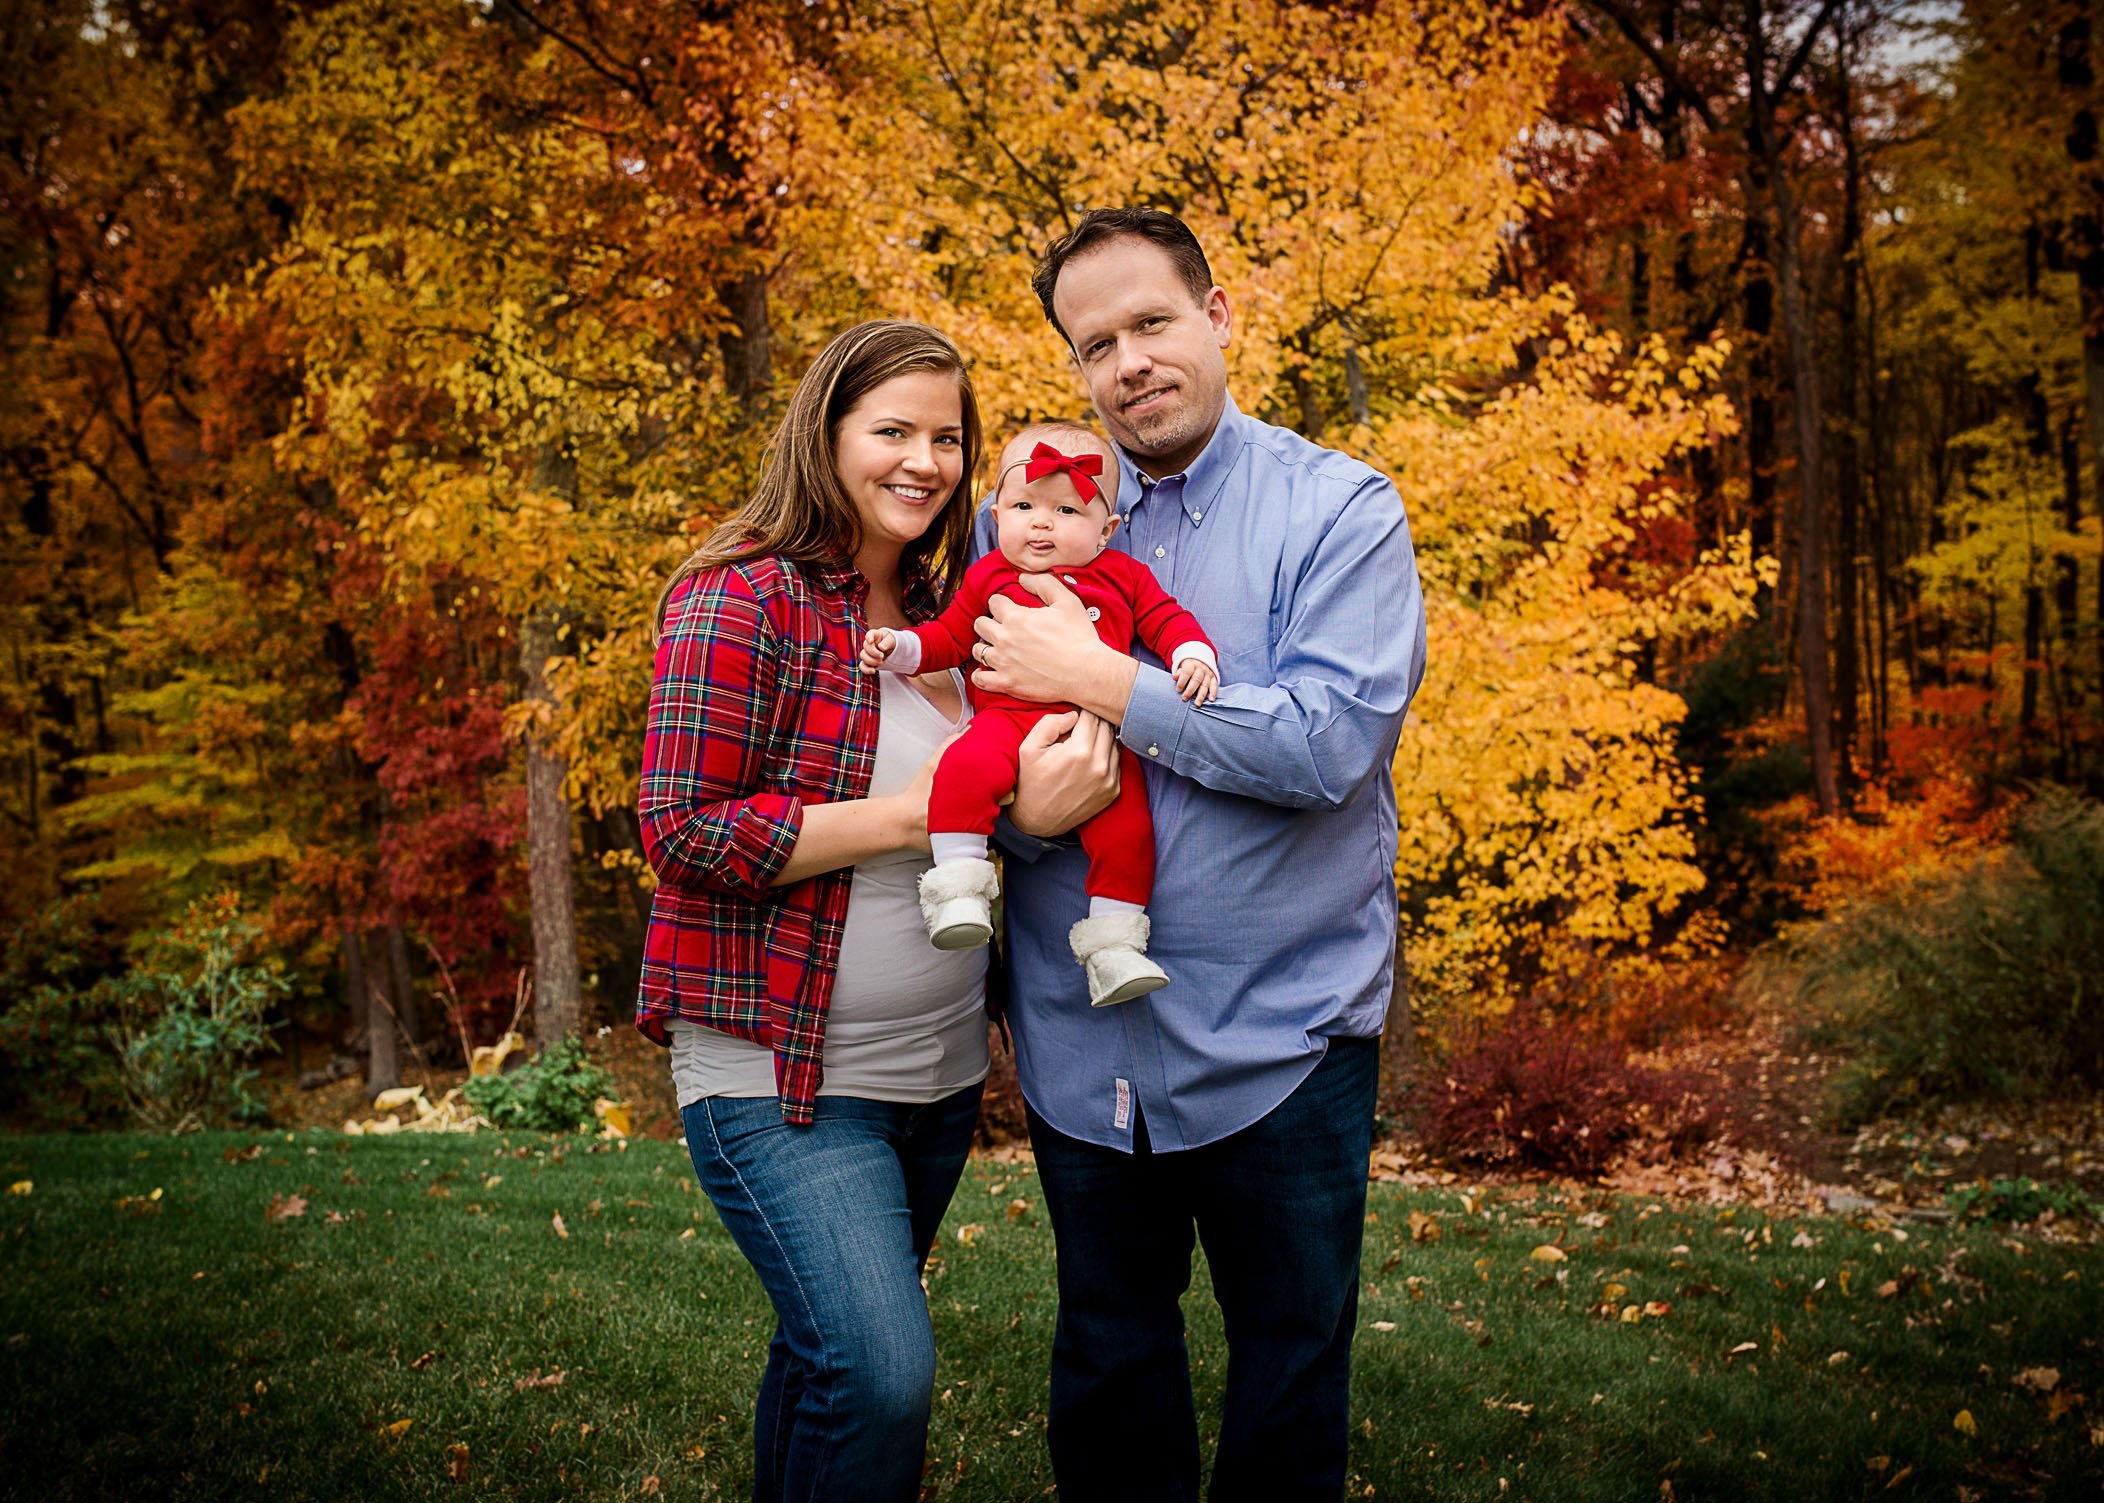 Mom and Dad hold 6 mo old baby girl outside with fall foliage One Big Happy Photo